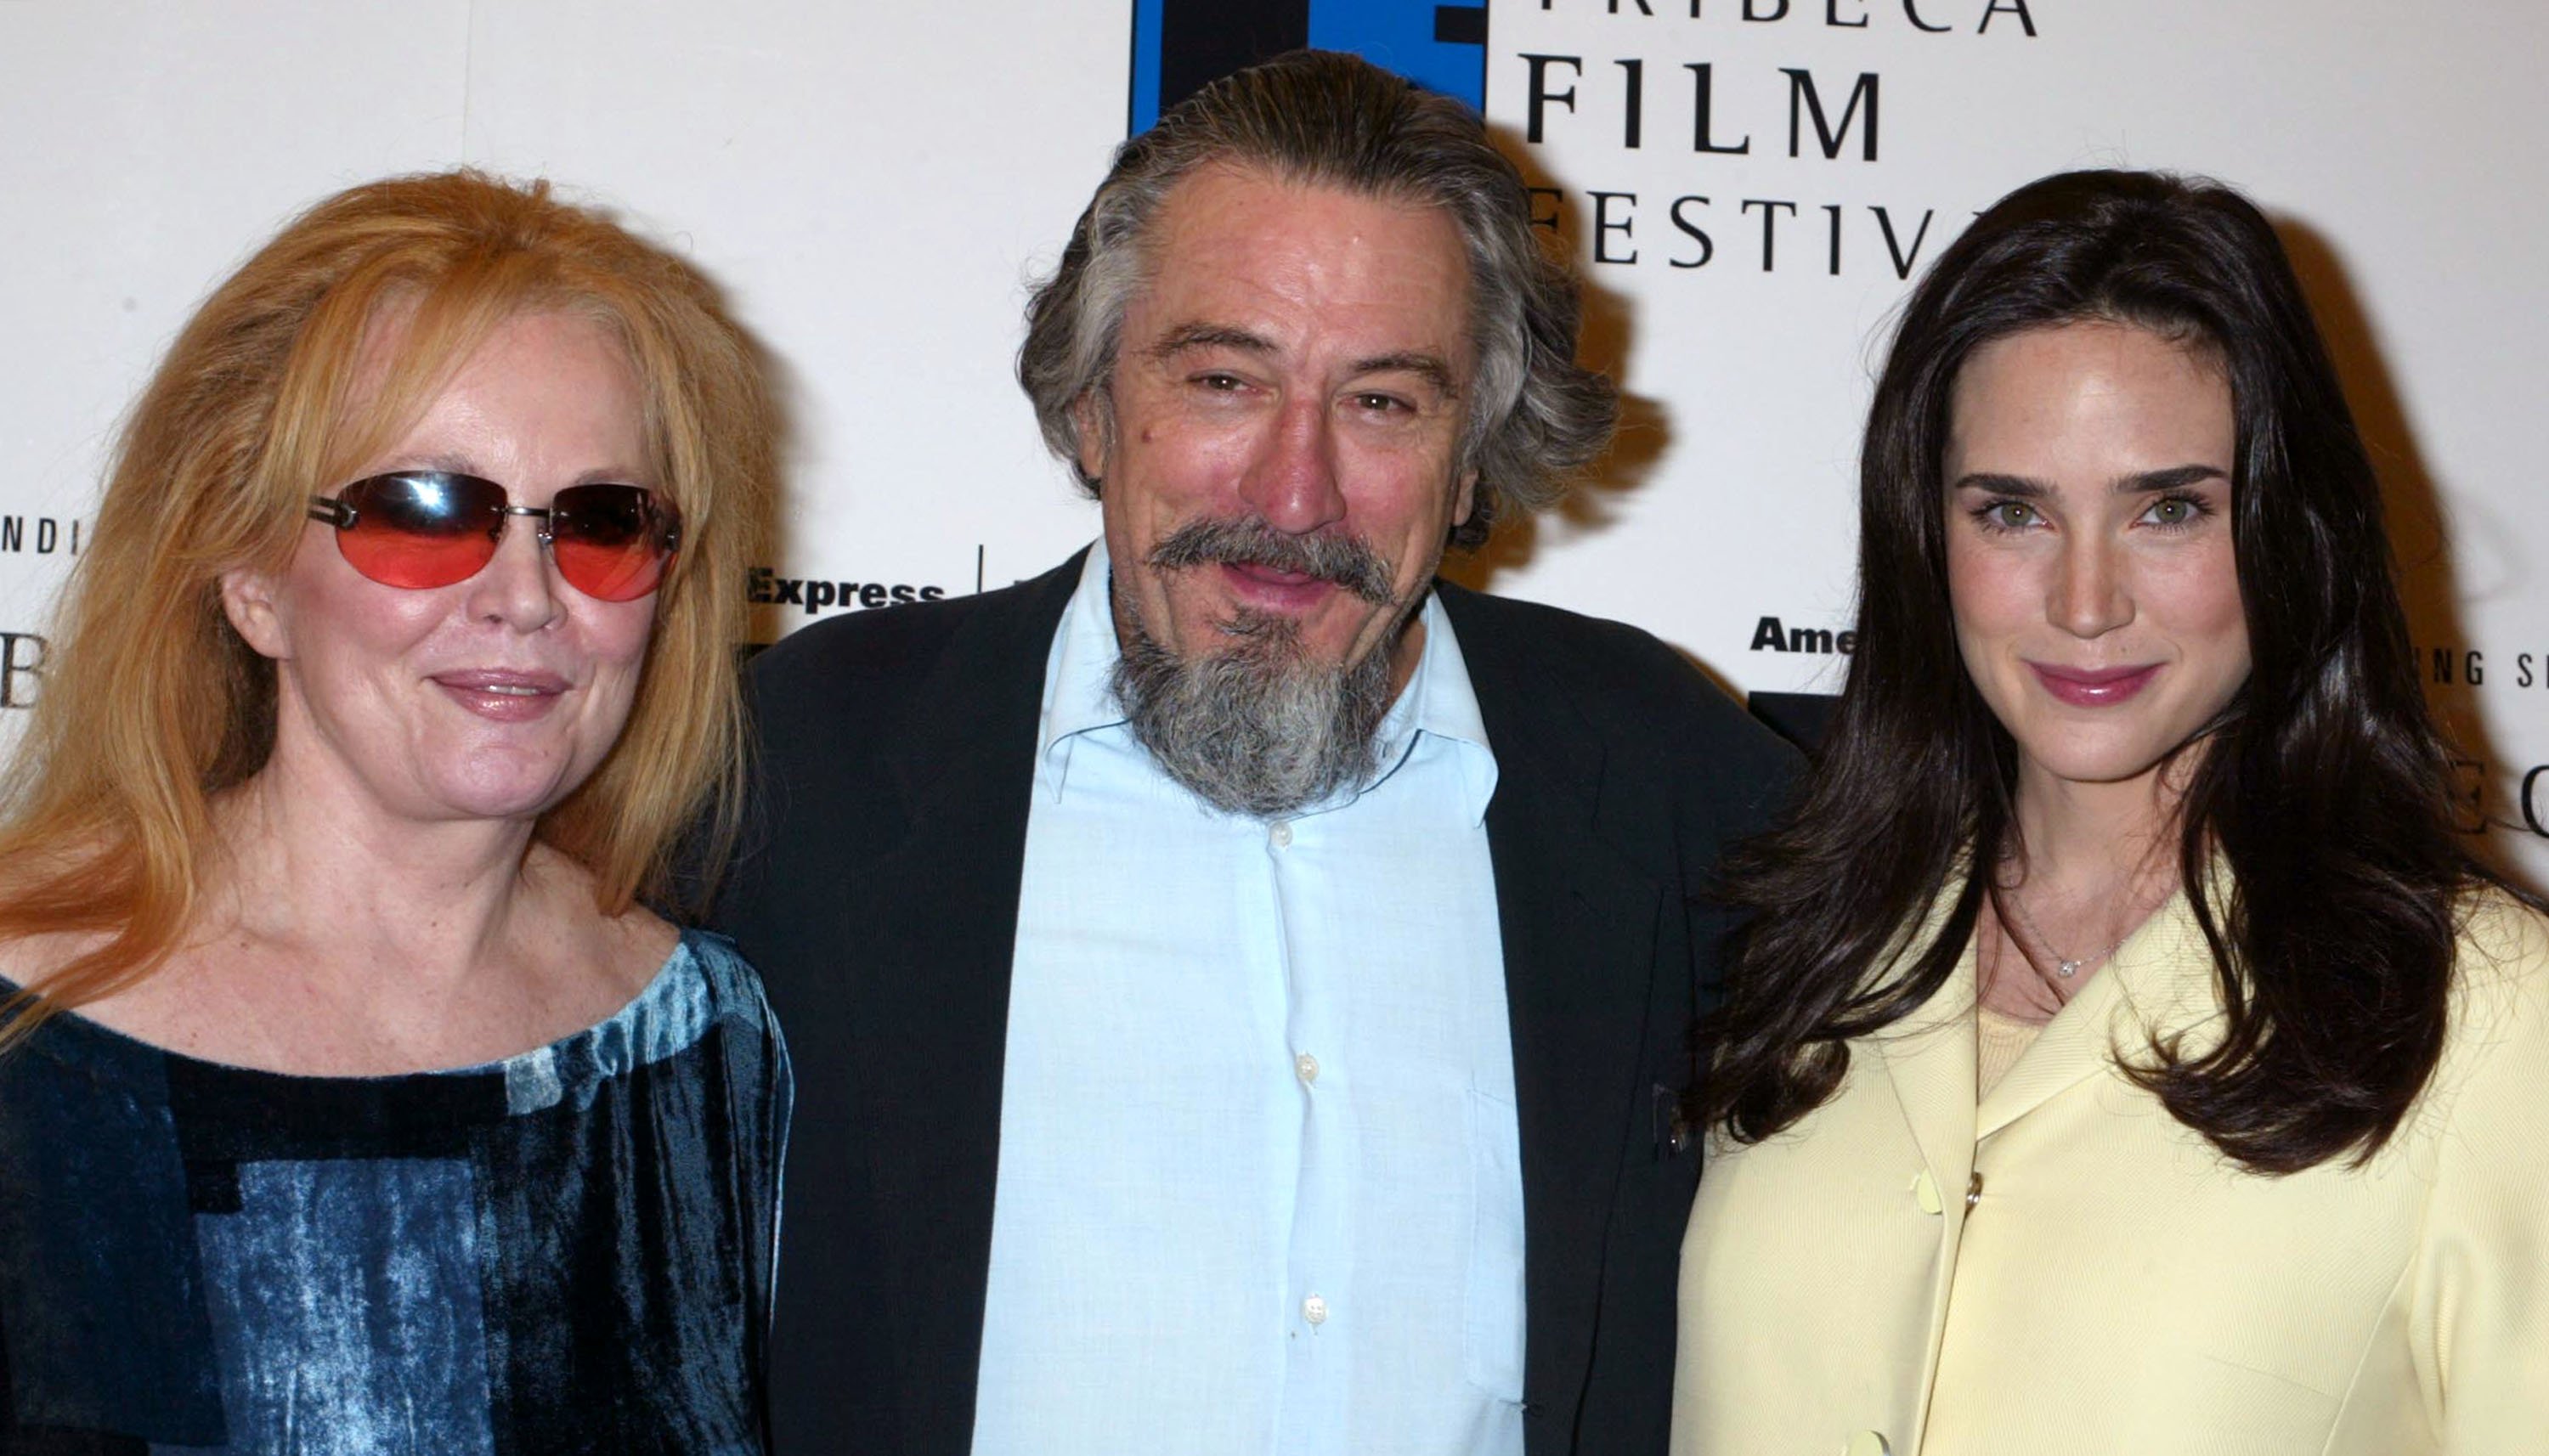 Tuesday Weld, Robert De Niro and Jennifer Connelly at 2003 Tribeca Film Festival. | Source: Getty Images